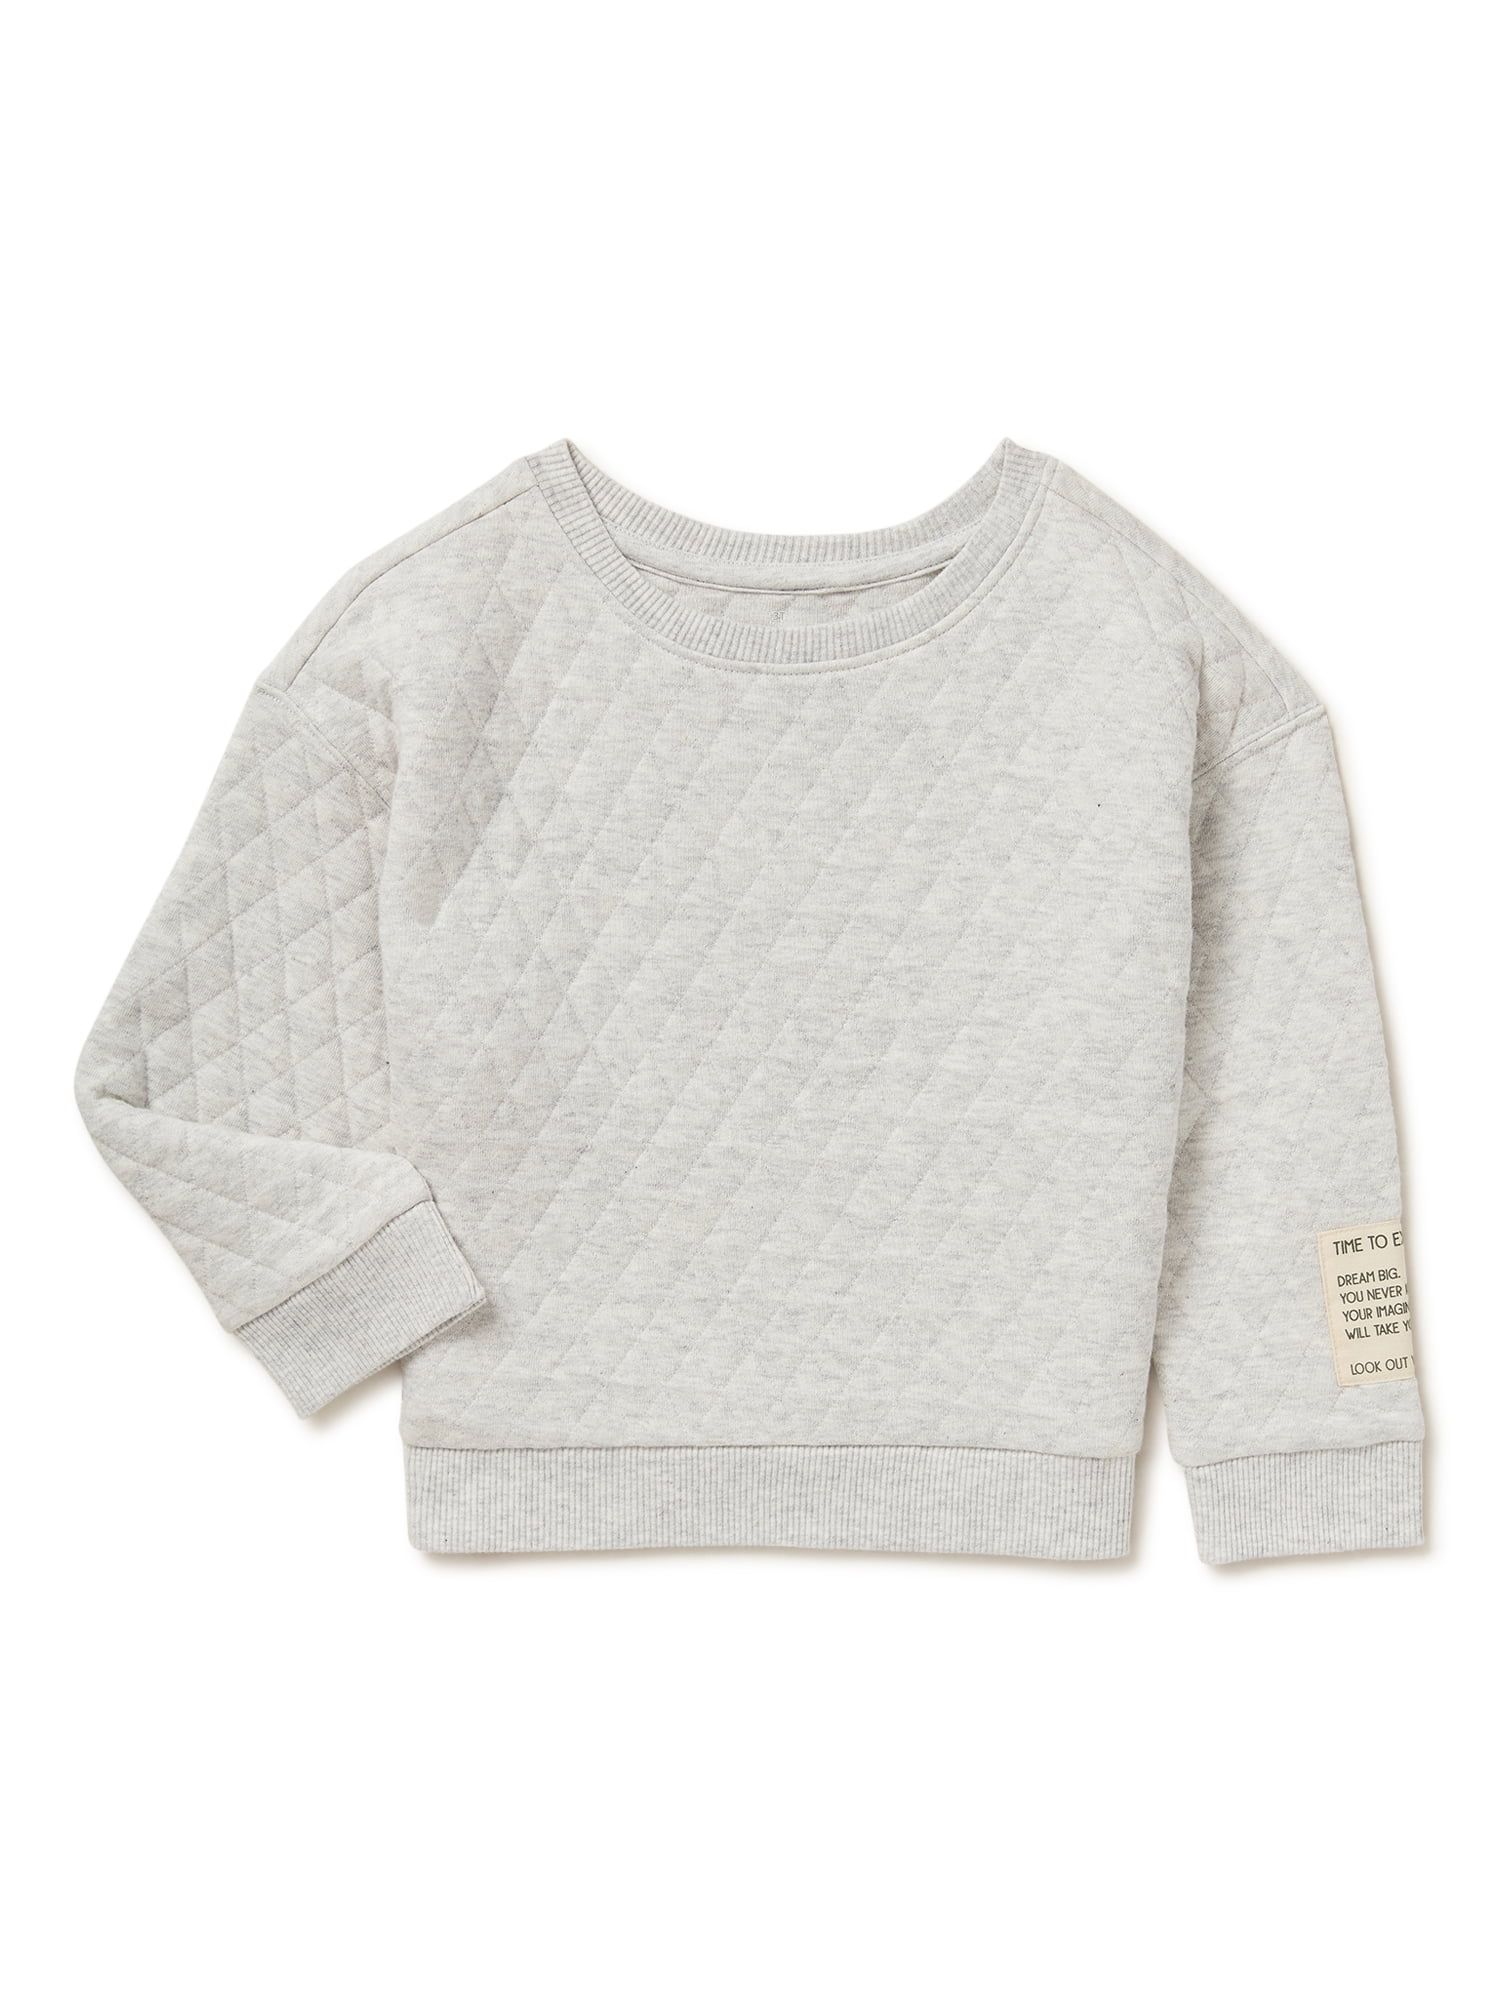 easy-peasy Baby and Toddler Girls Quilted Sweatshirt, Sizes 12 Months-5T - Walmart.com | Walmart (US)